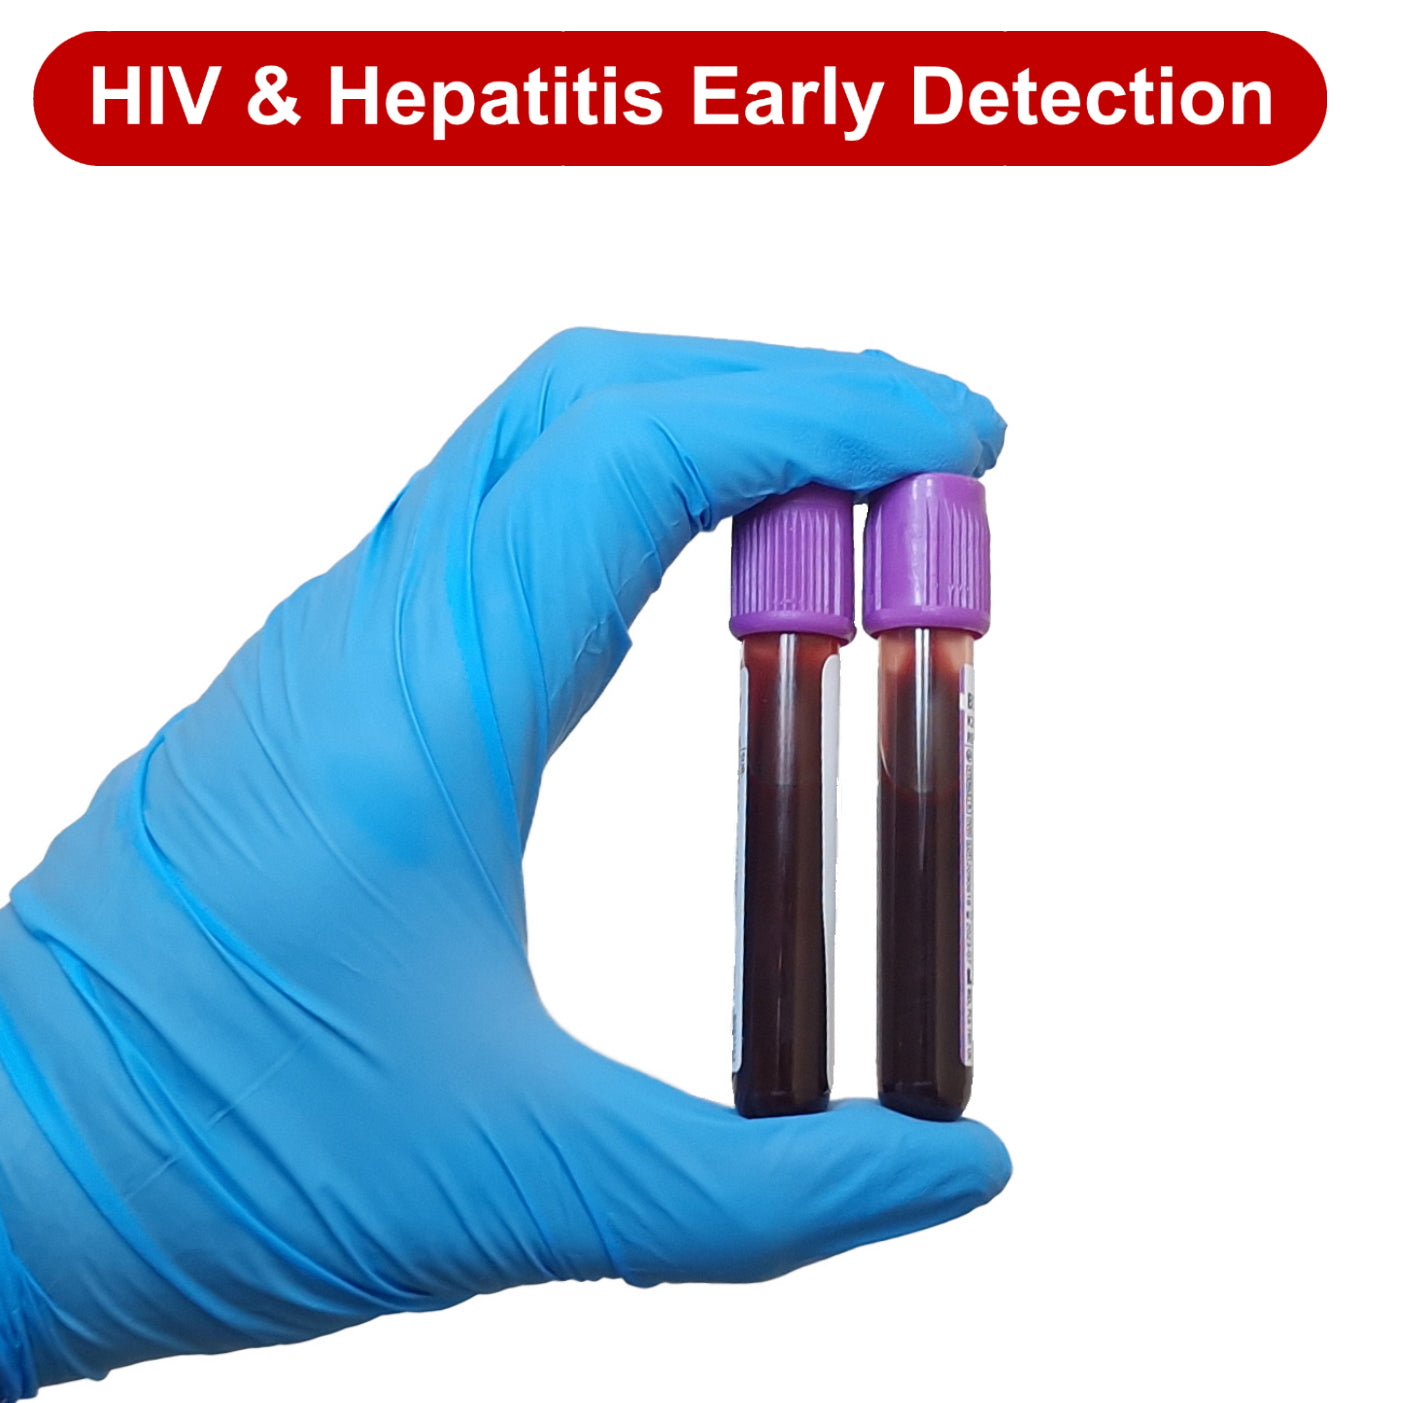 HIV and Hepatitis Early Detection Blood Test